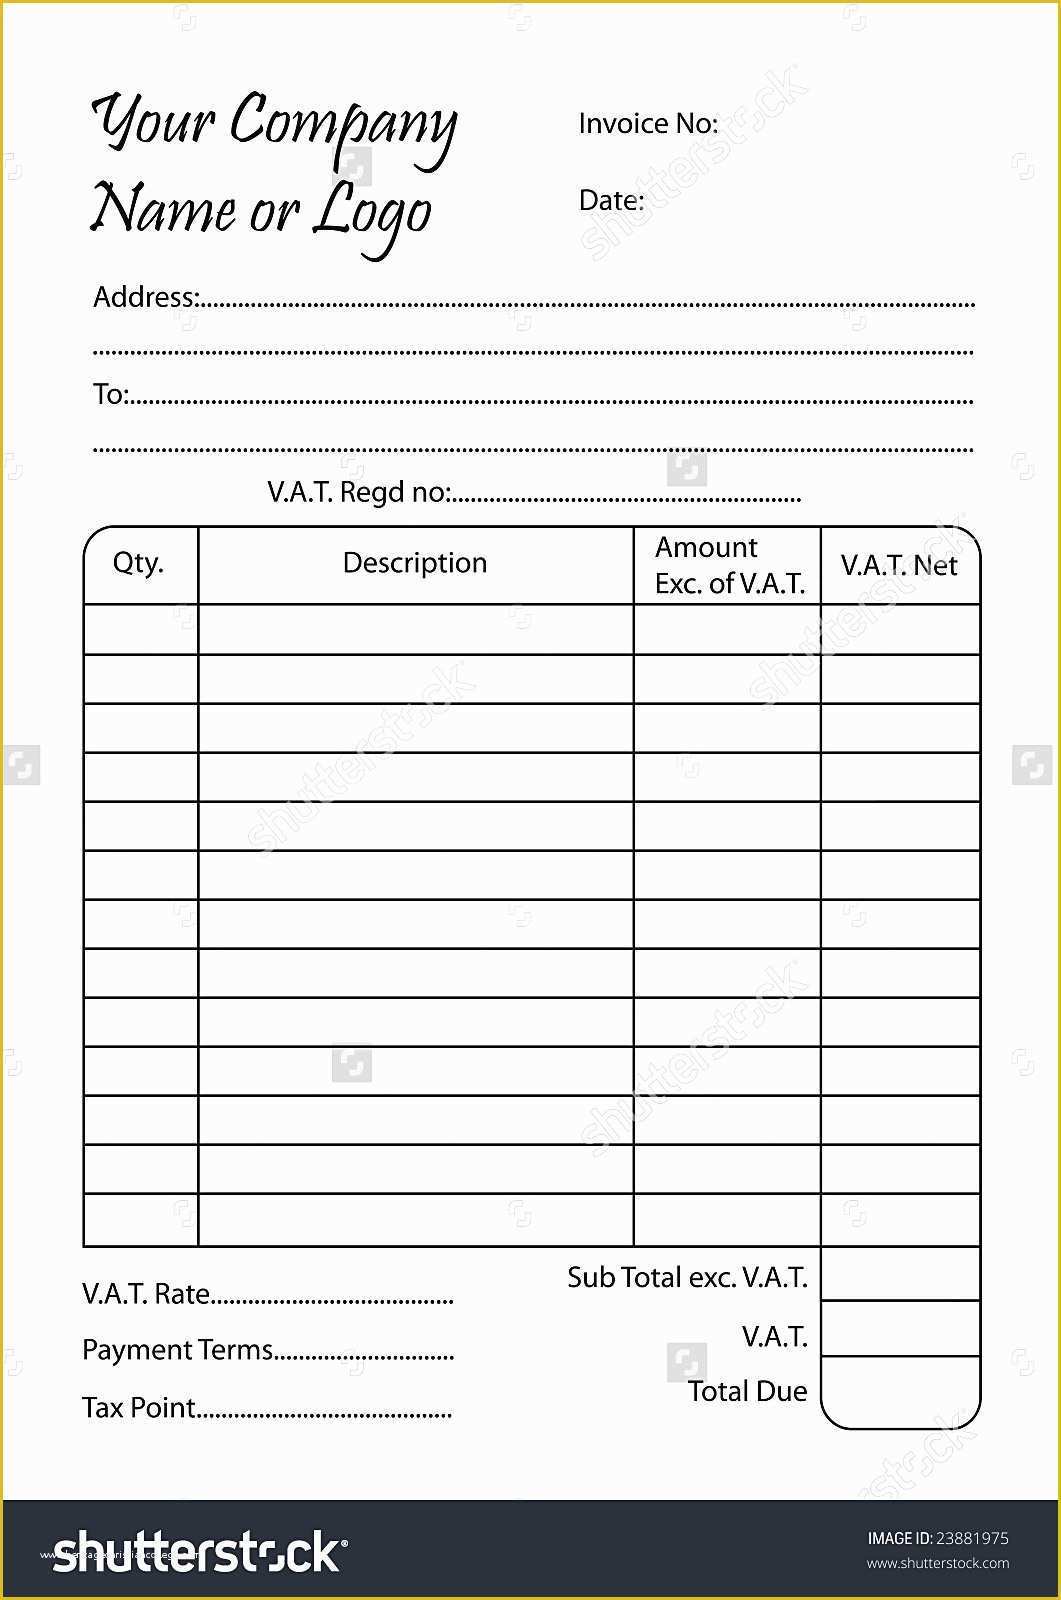 Free Personal Invoice Template Of Bill Receipt Mughals